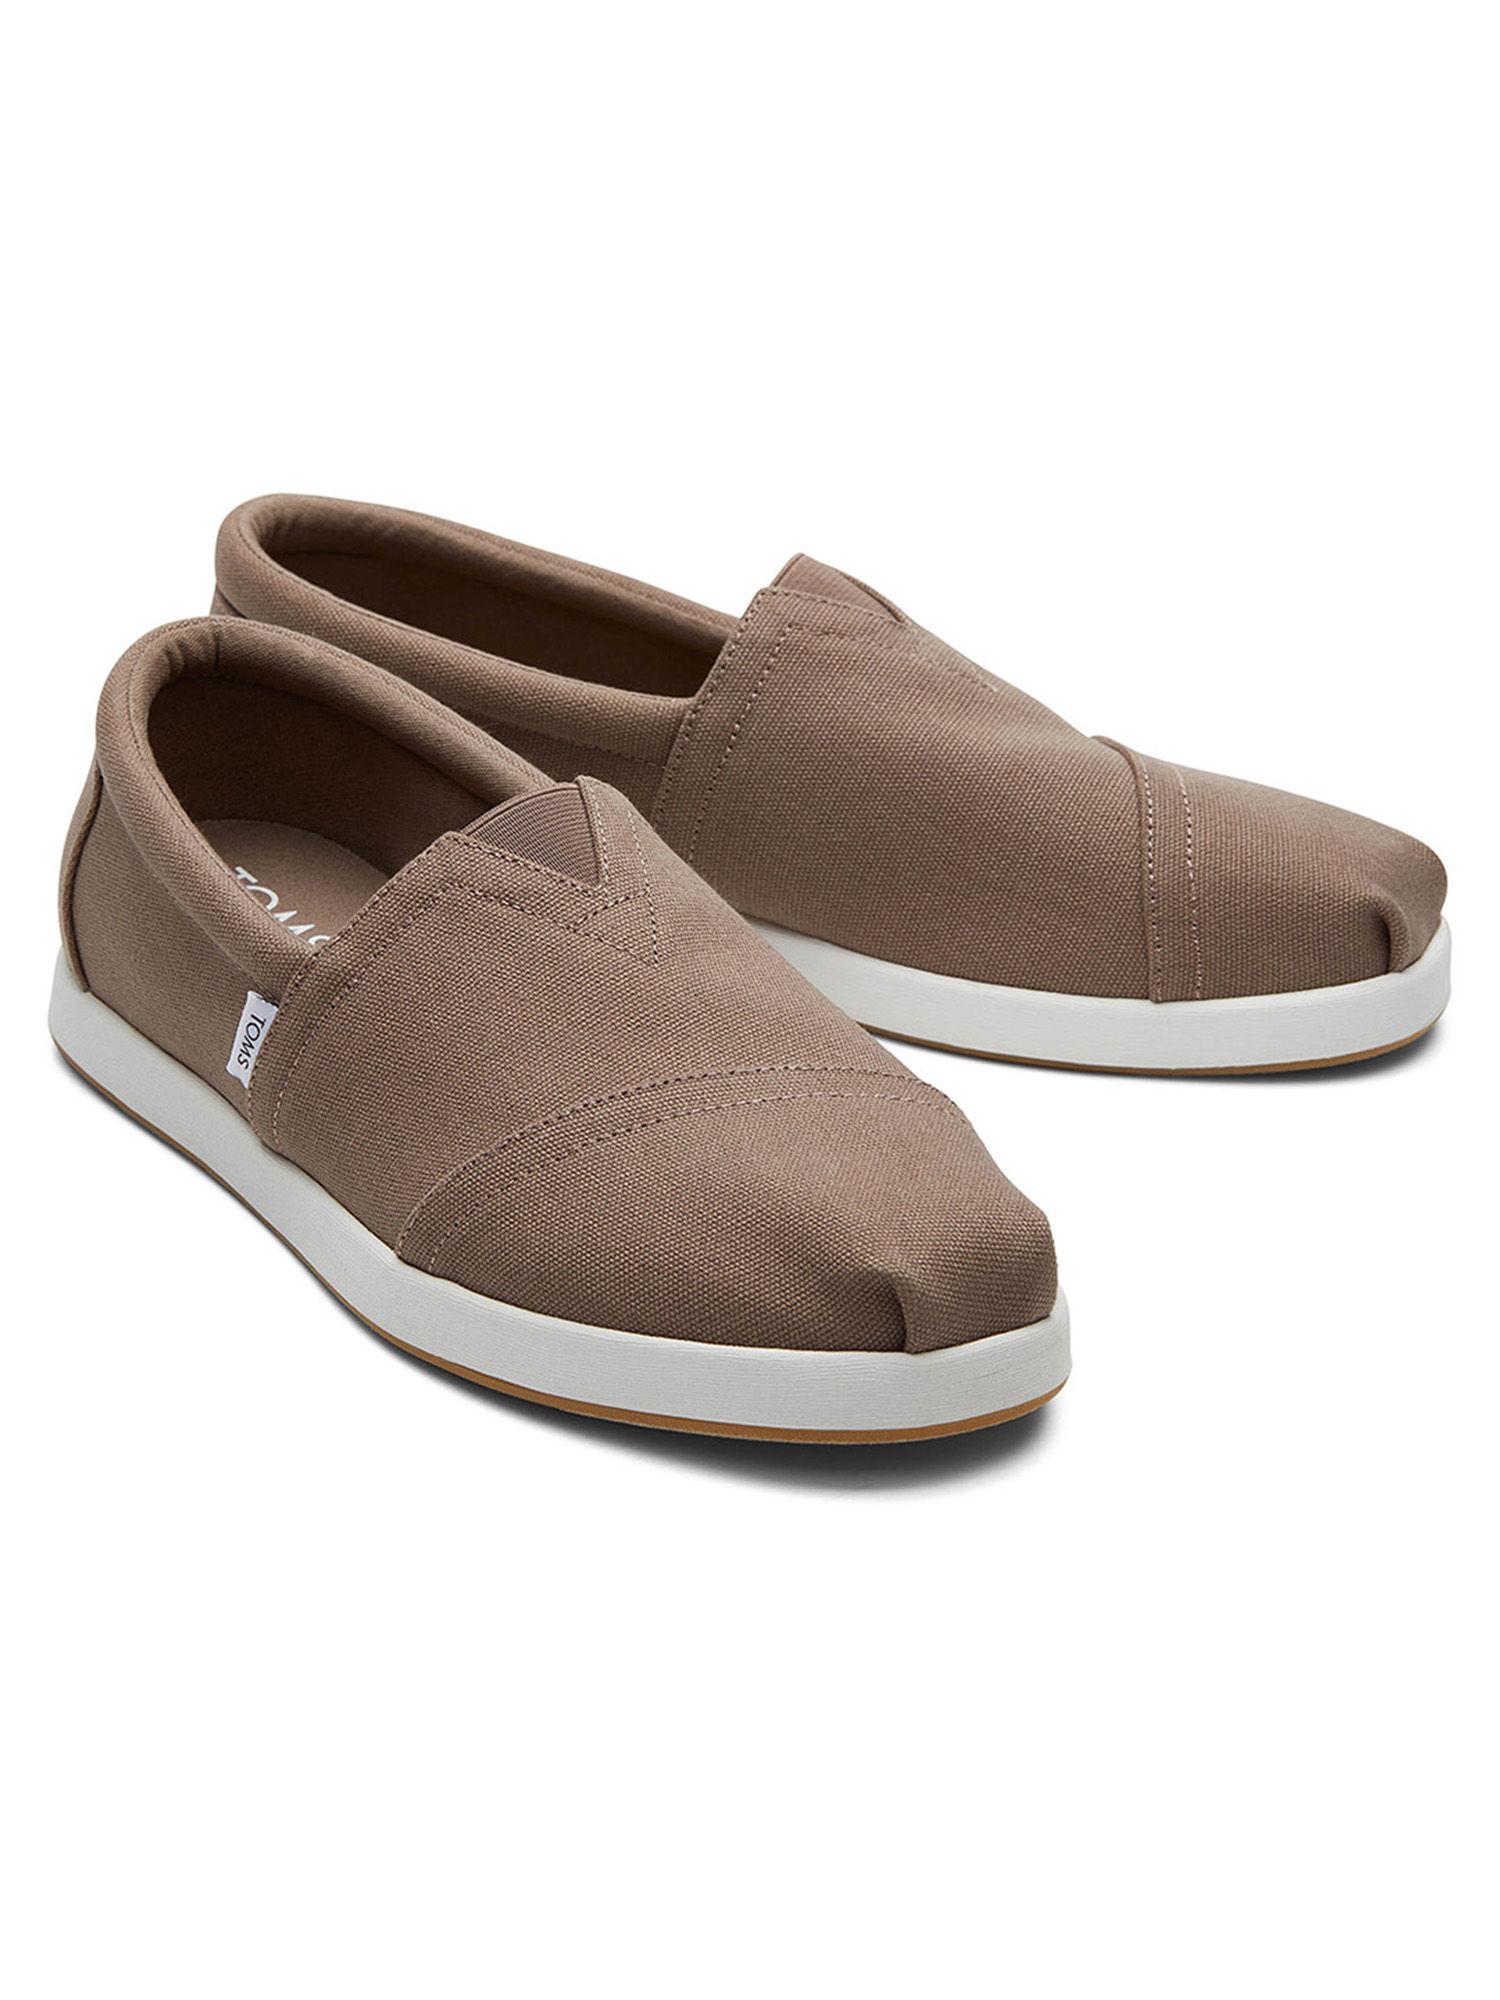 alp fwd wide width brown casual shoes